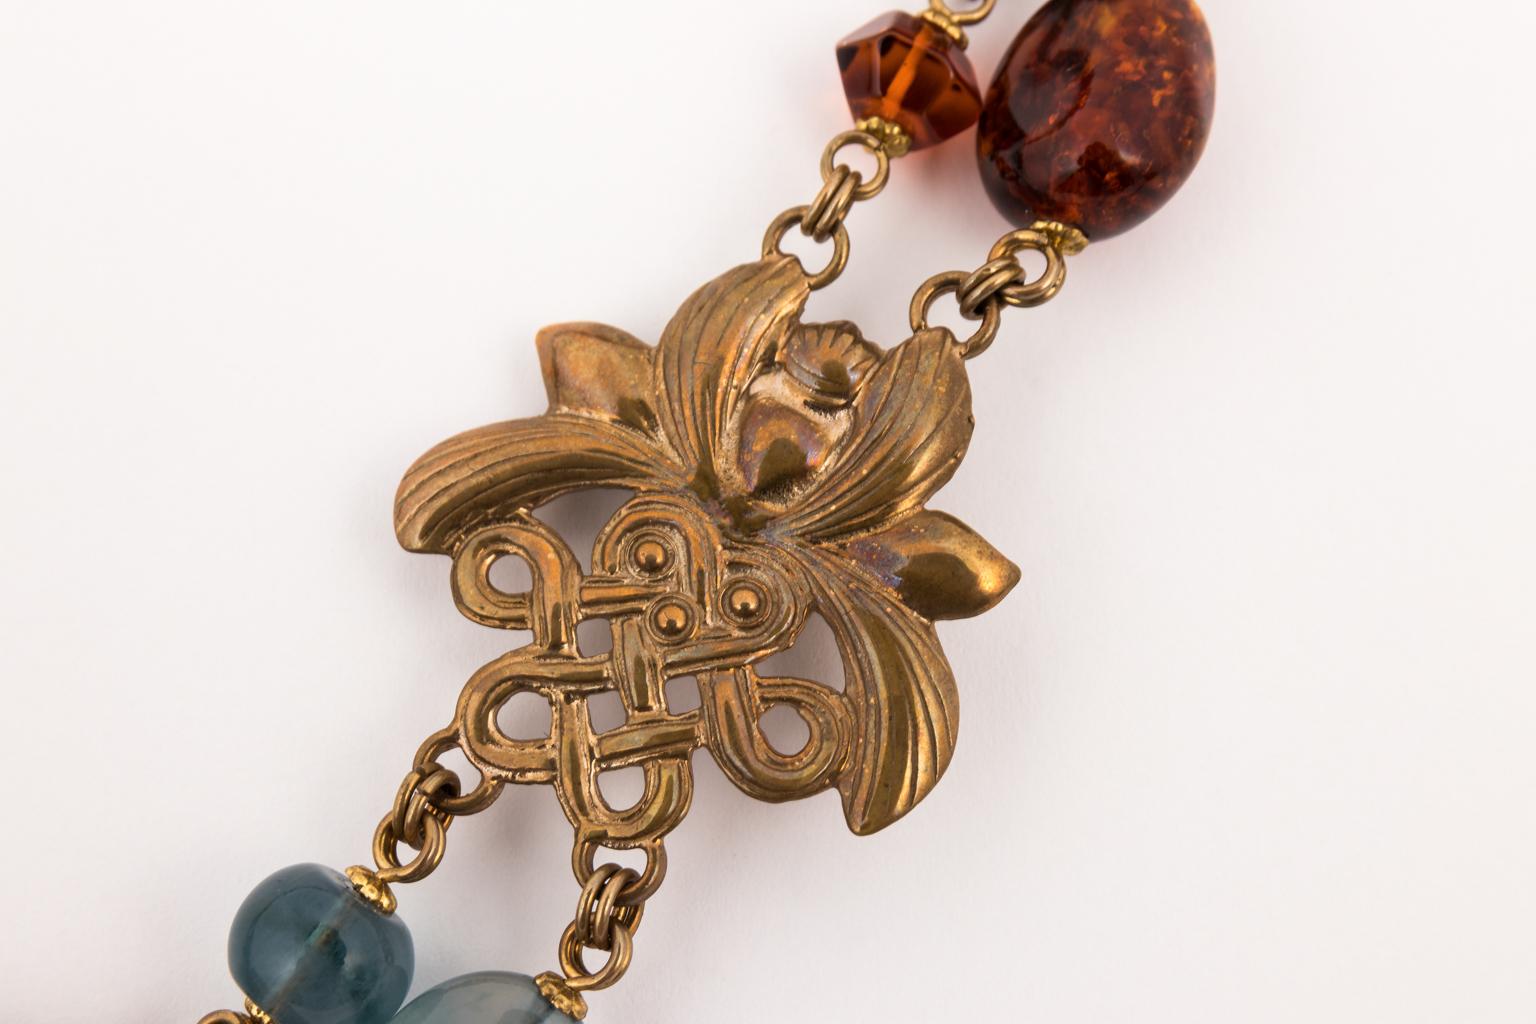 1990s Stephen Dweck sterling and stone necklace in a Chinese style with lotus flower and endless knot motifs. There are two large amber cabochons and each is 1 1/8 X 7/8 inches with the mounting. The center piece is one large landscape agate stone